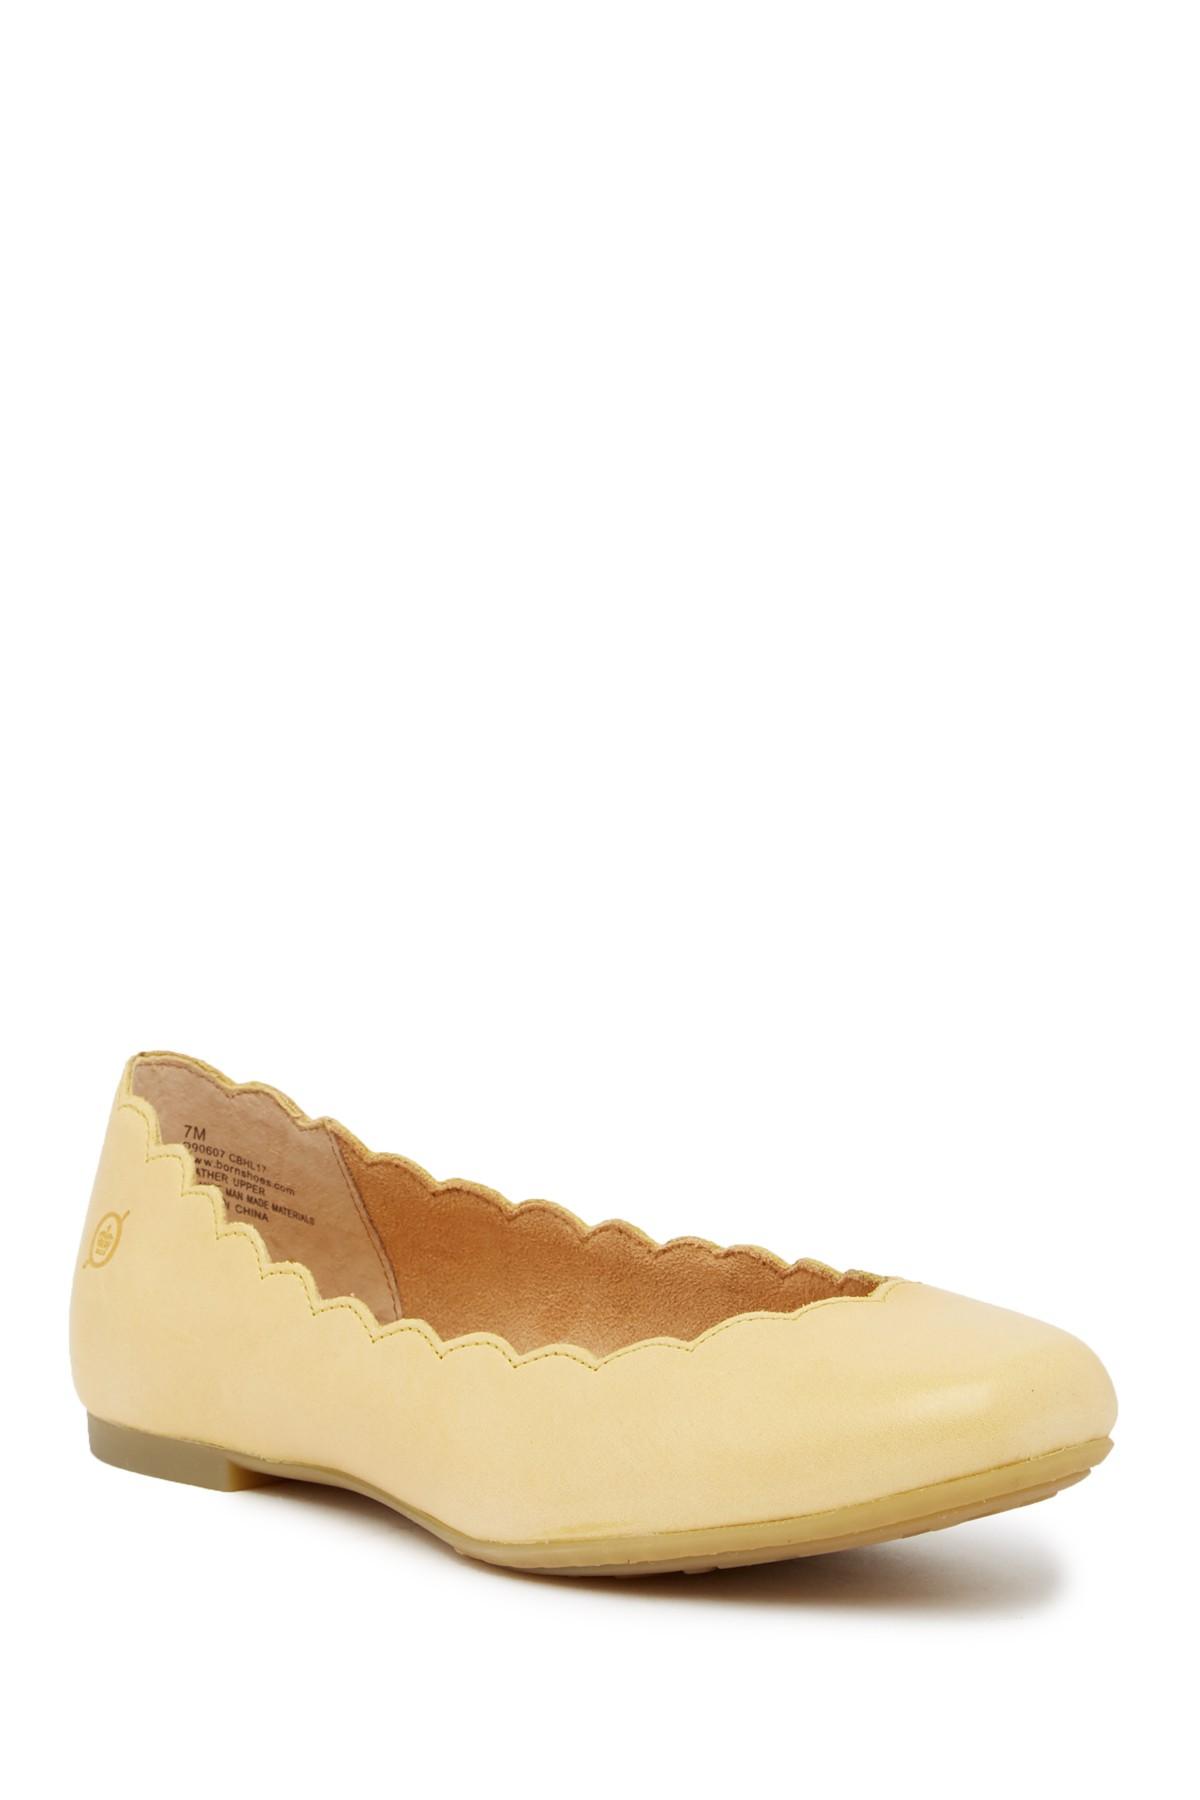 Born Allie Scalloped Leather Flat in 